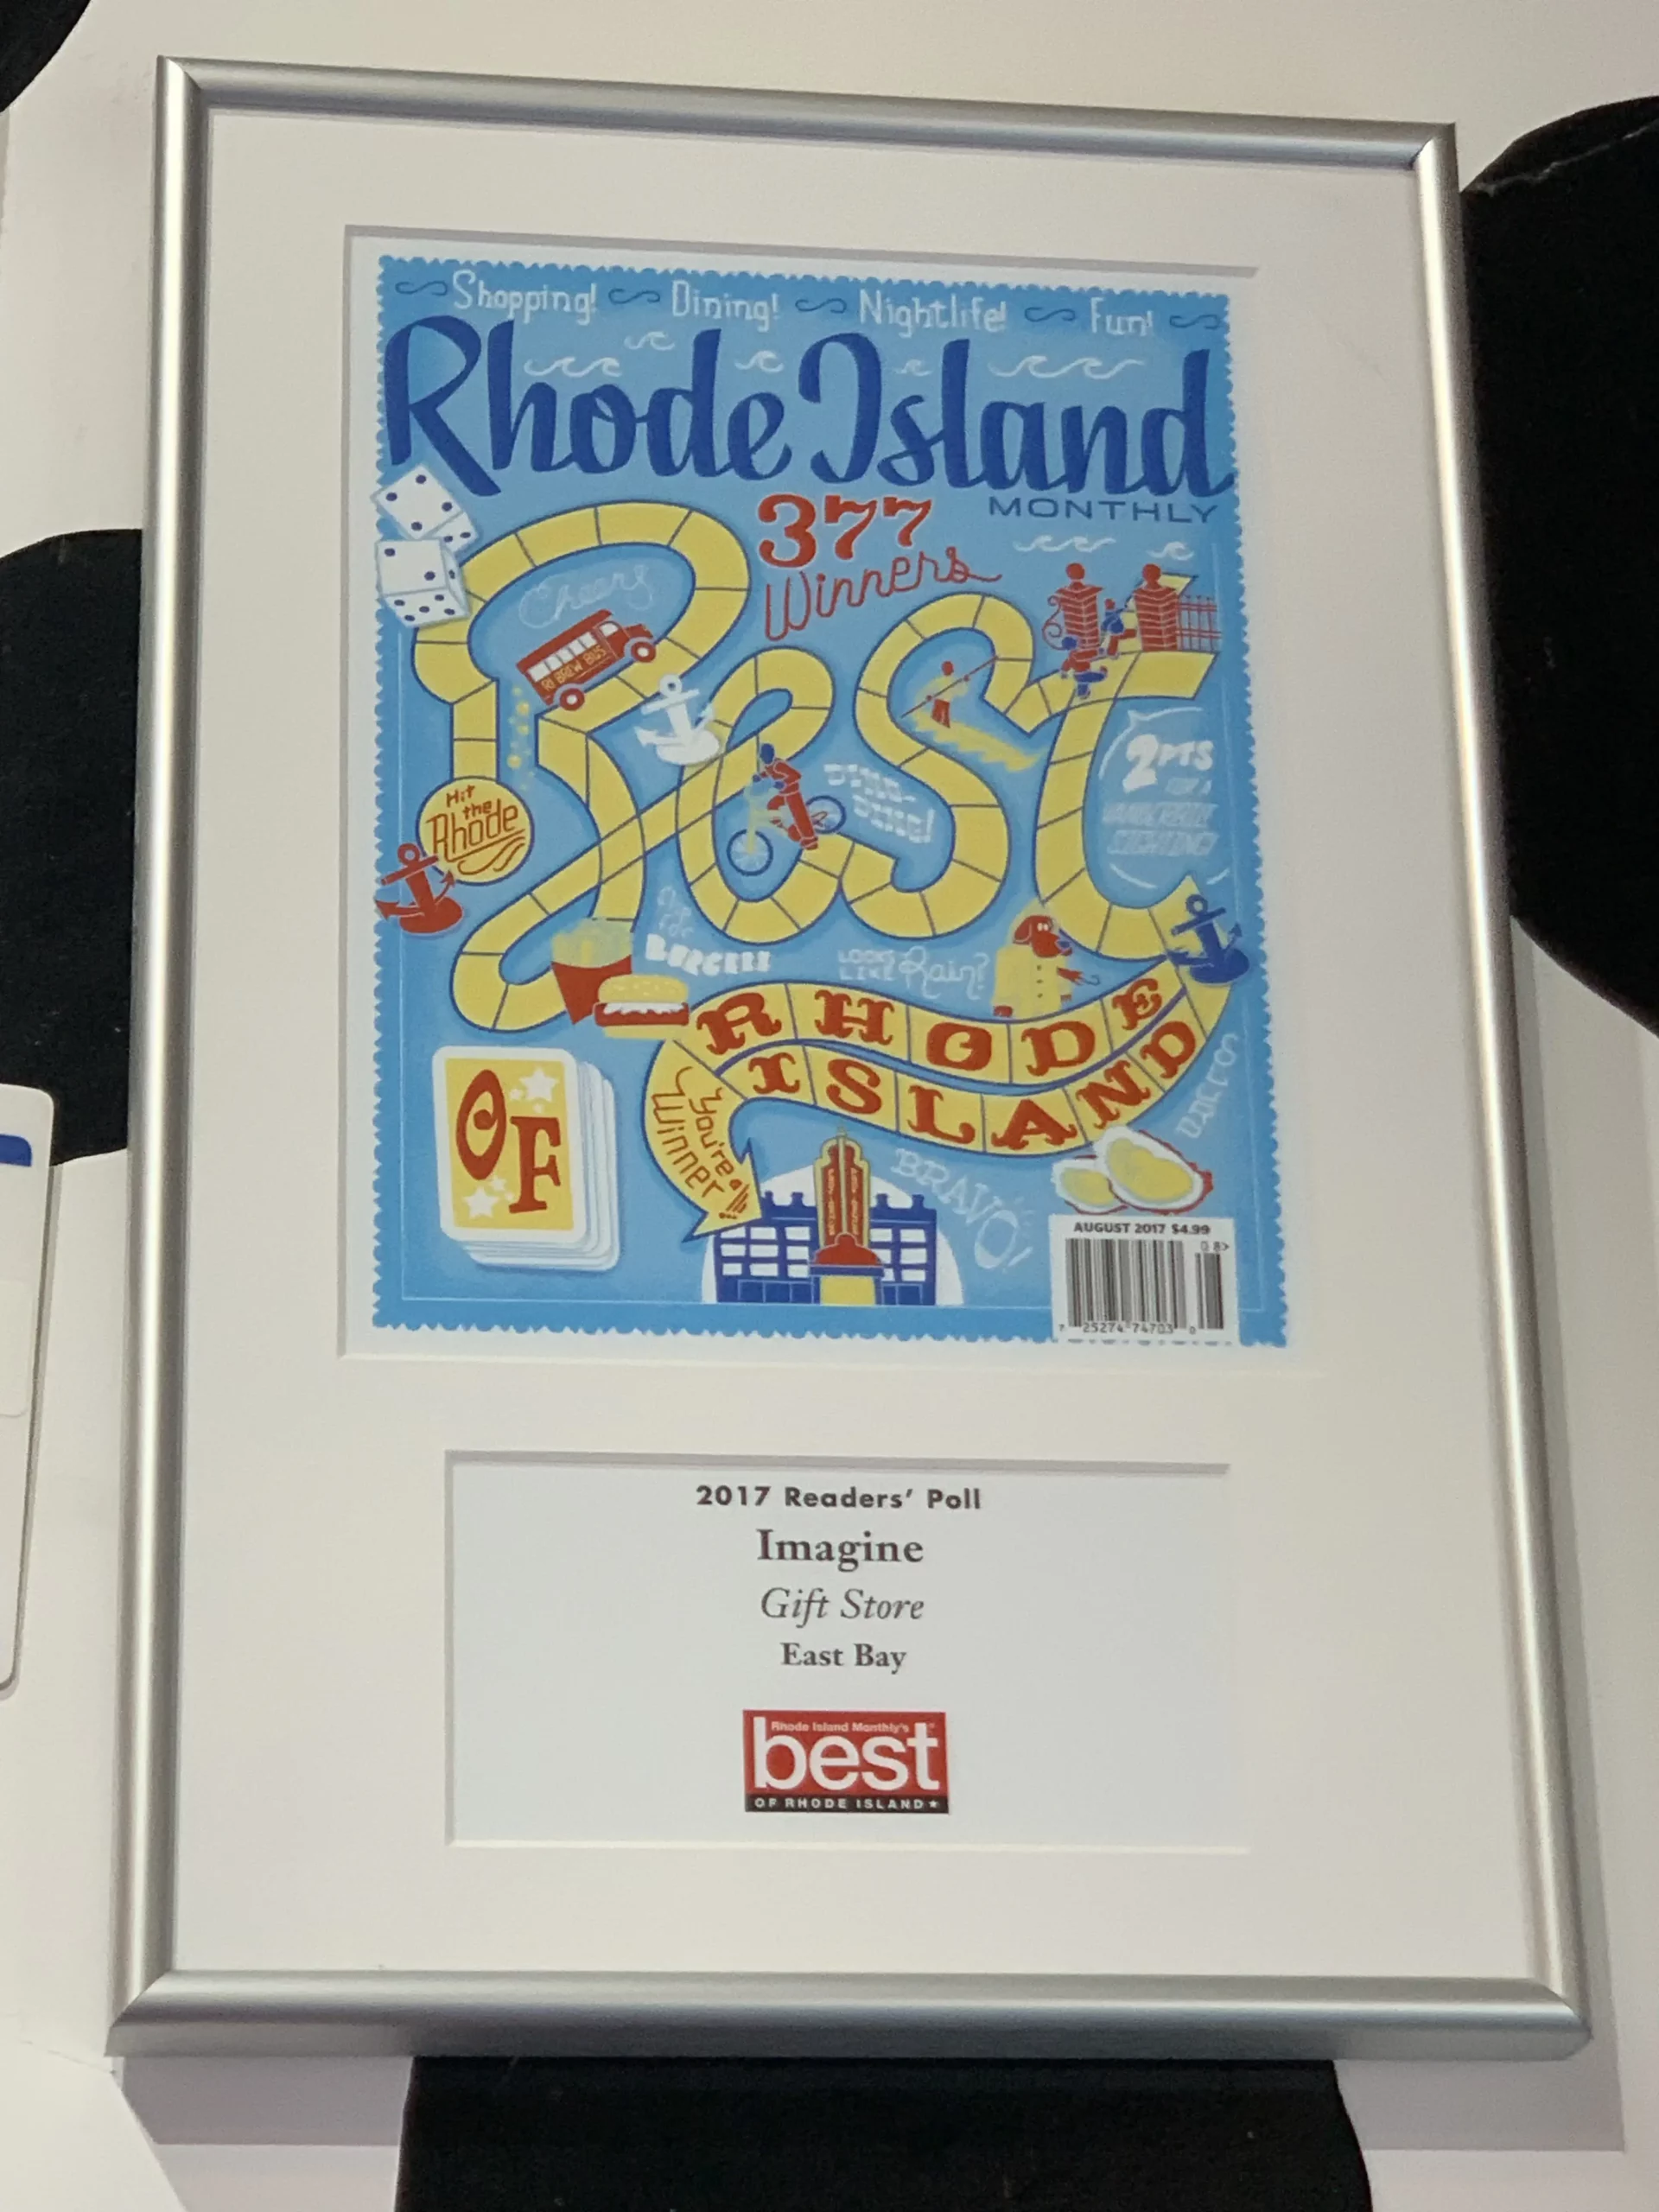 Award stating that Imagine Gift Store is the recipient of the 2017 Readers' Poll Best of Rhode Island award.